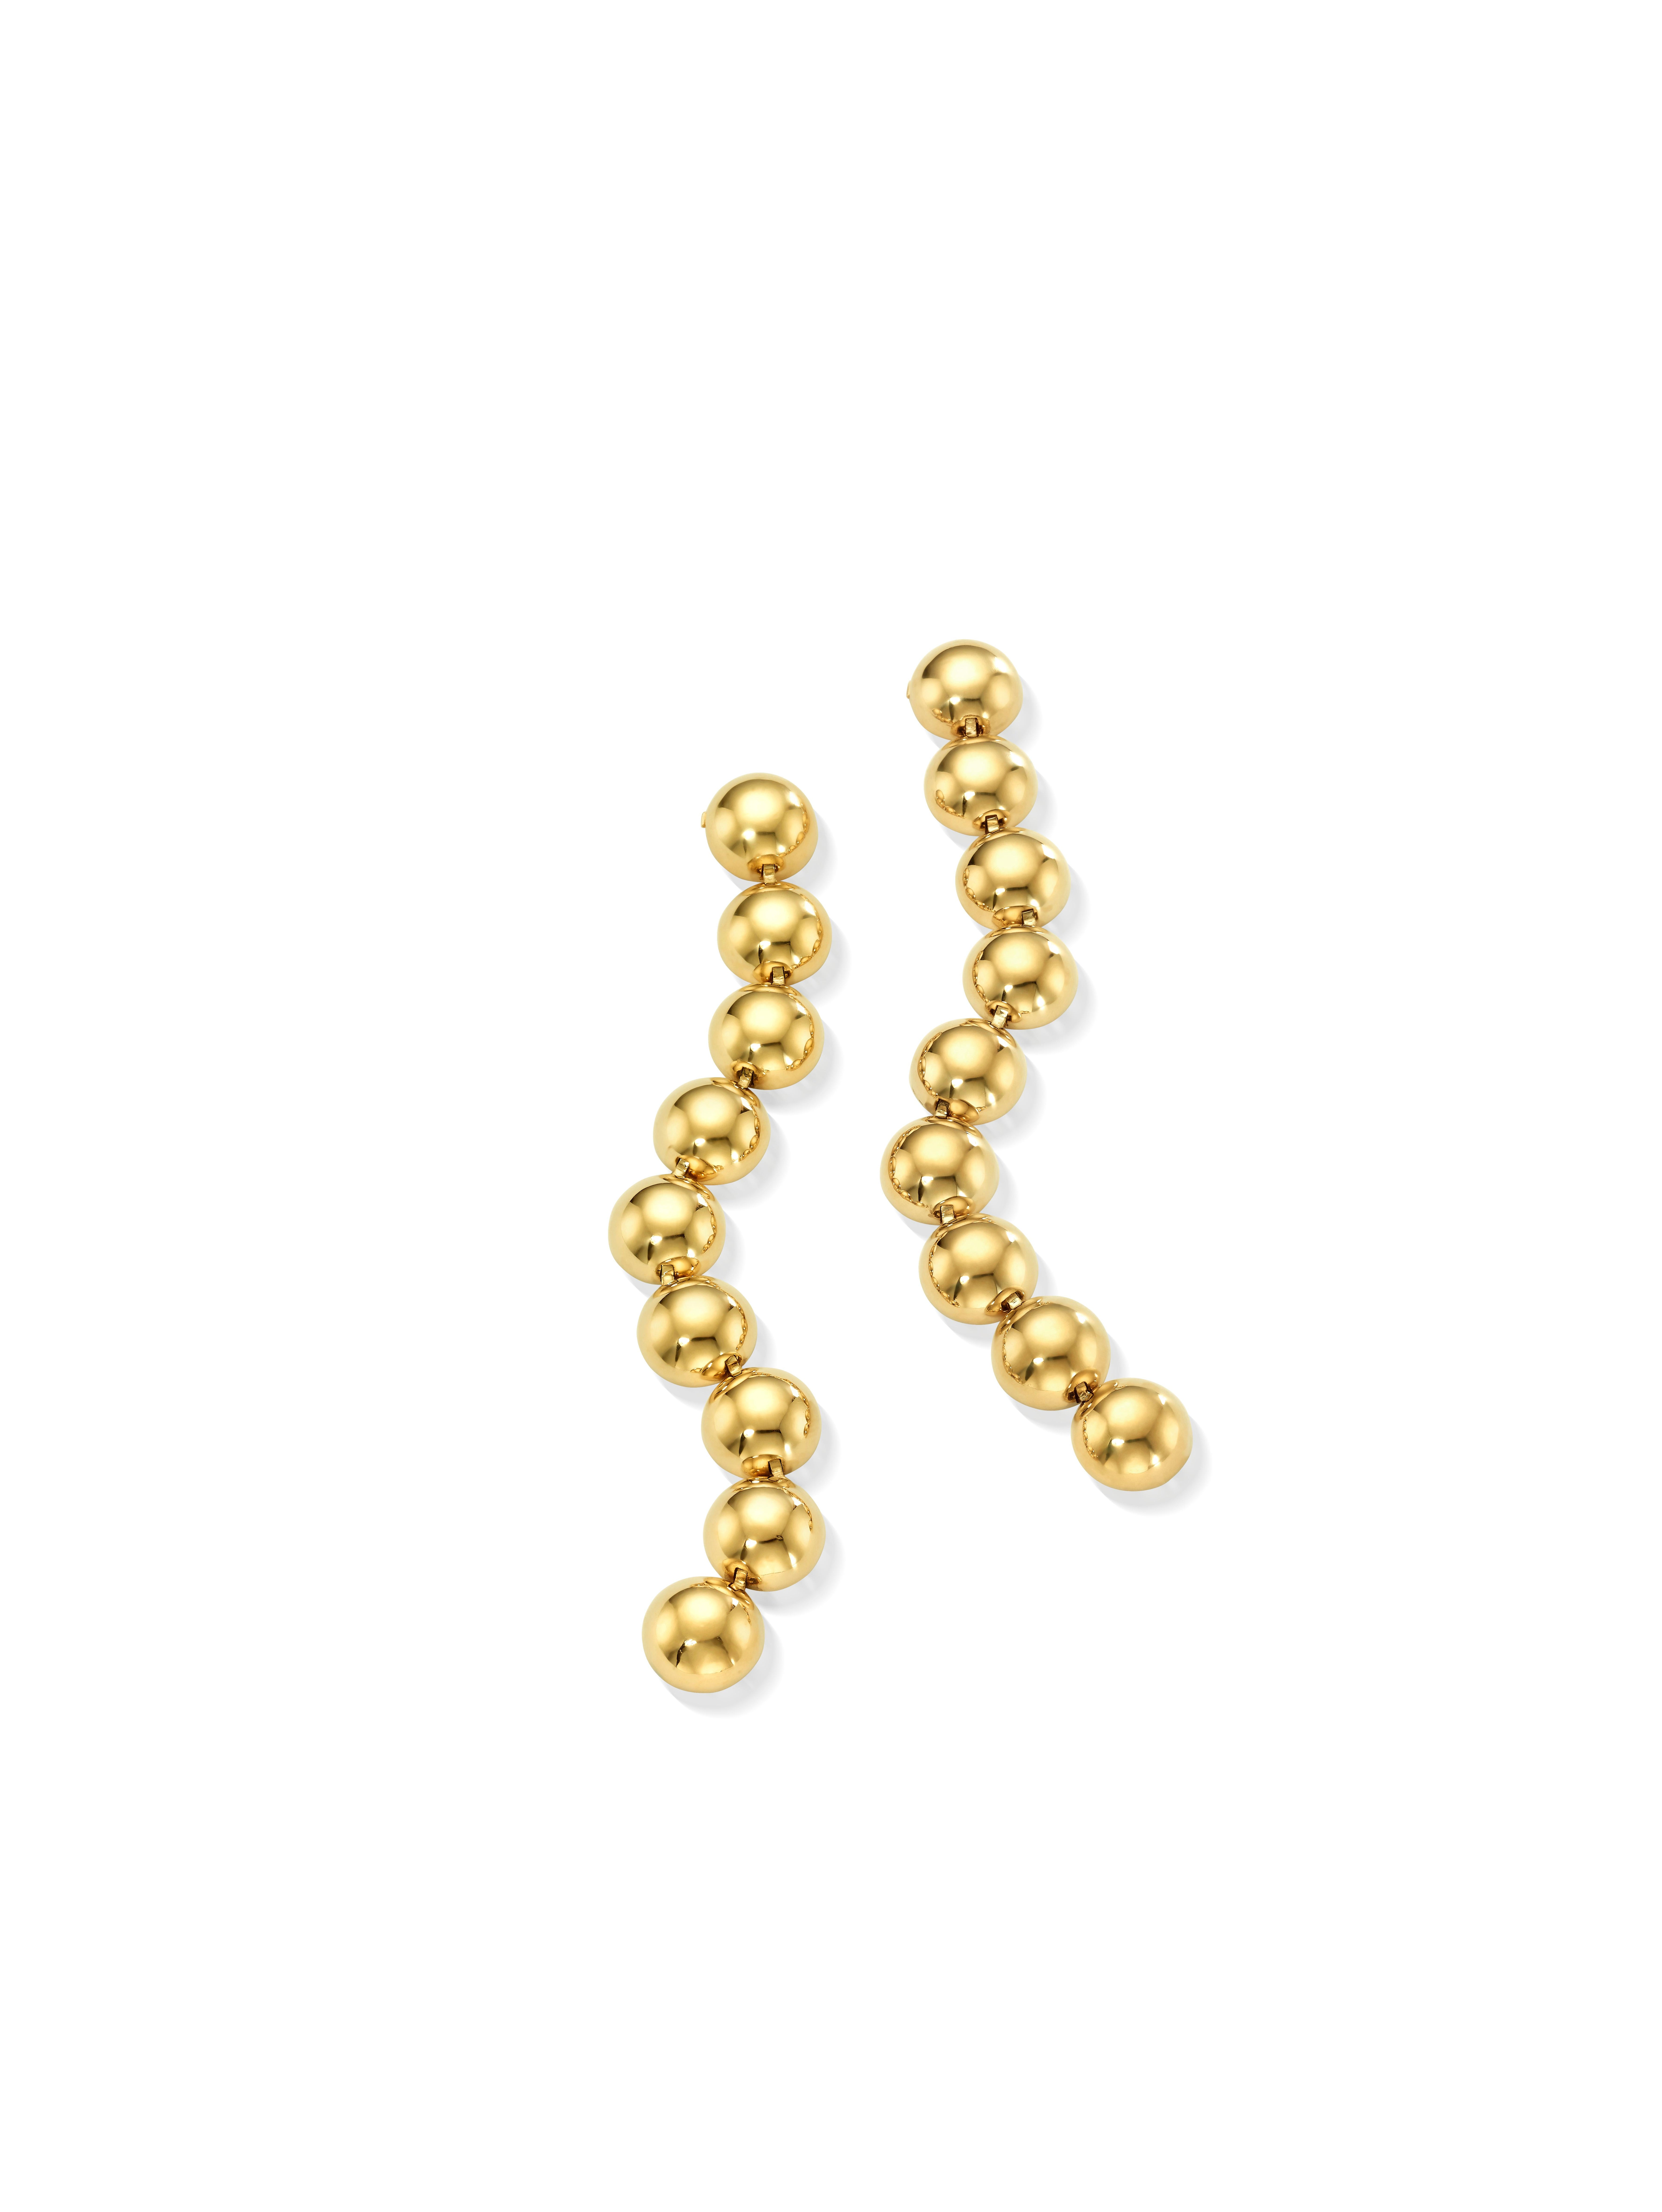 Golden bubbles. Hemispheric droplets cascade from the ear, forming a gorgeous column that gracefully elongates the neck. Handcrafted in 18k high polished gold. Also available in size small and  large.

From the CADAR Psyche Collection
